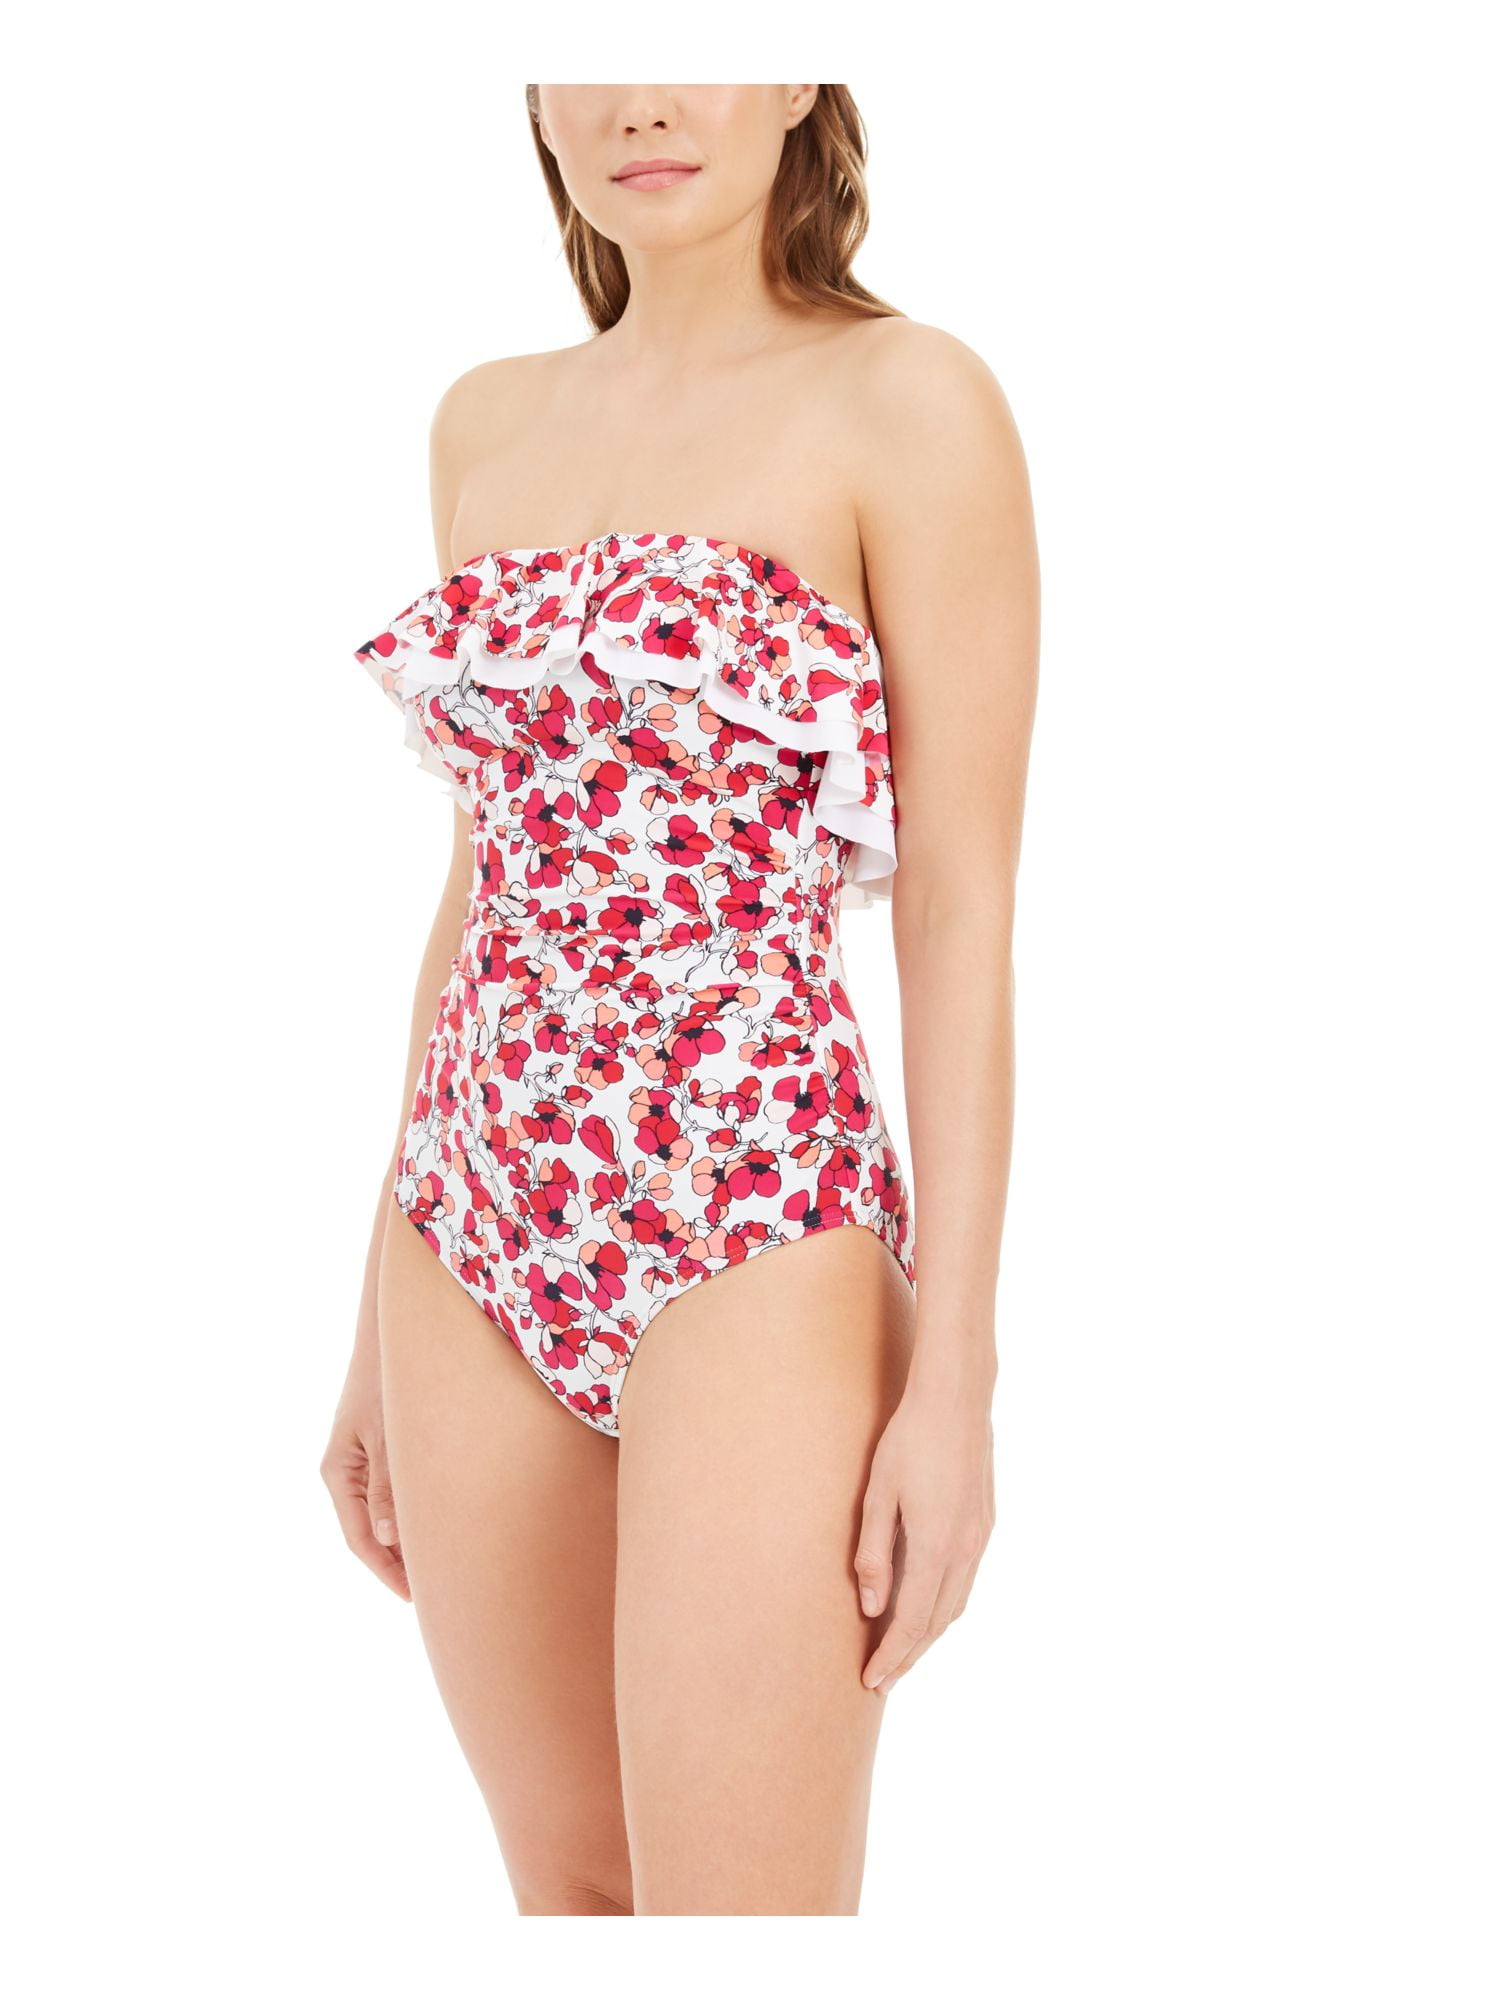 TOMMY HILFIGER Women's White Removable Strap Removable Cups Ruffled Bandeau One Swimsuit 12 - Walmart.com